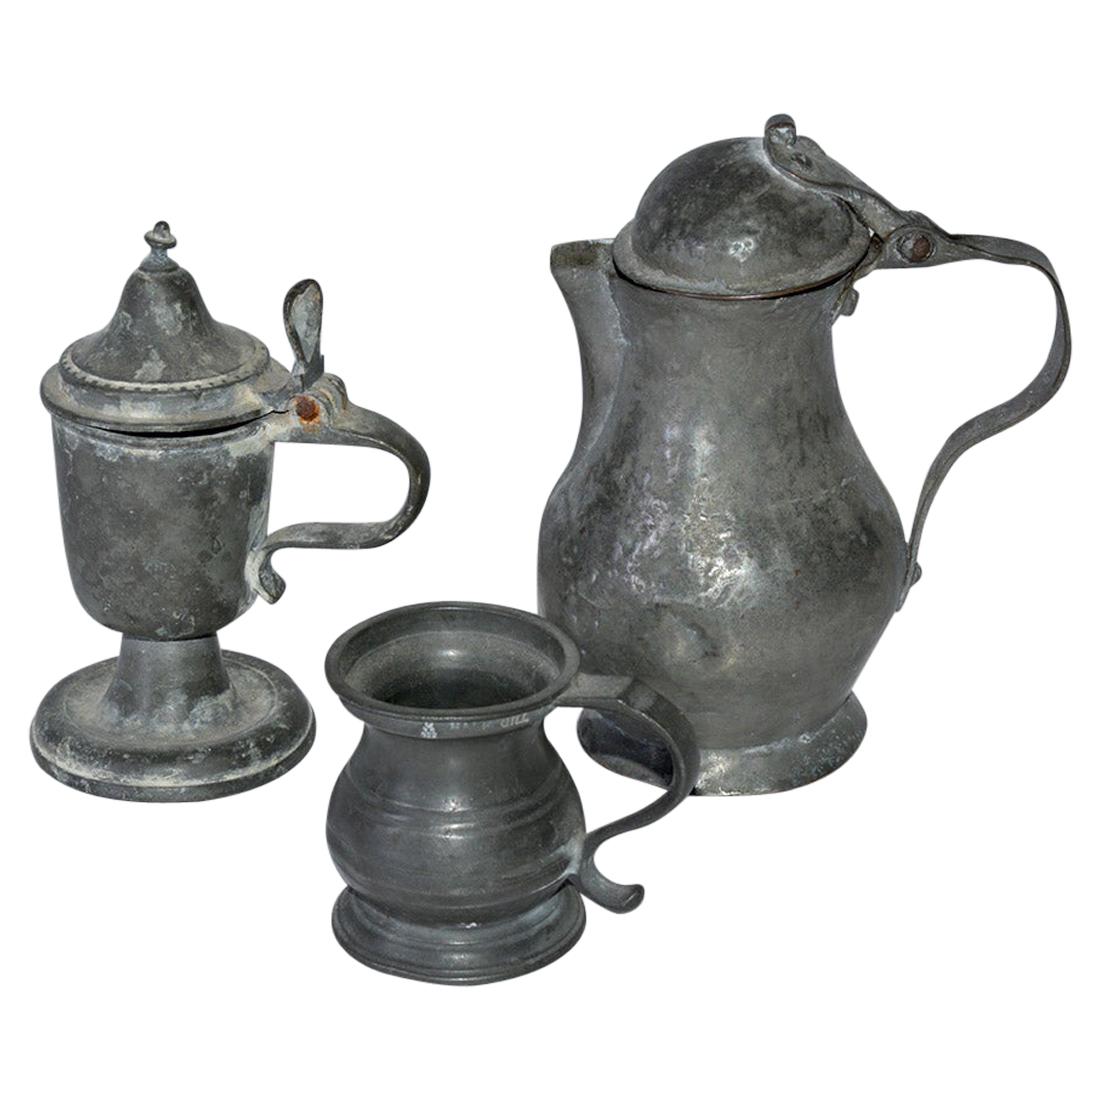 Collection of Small Early Pewter Cups and Jugs